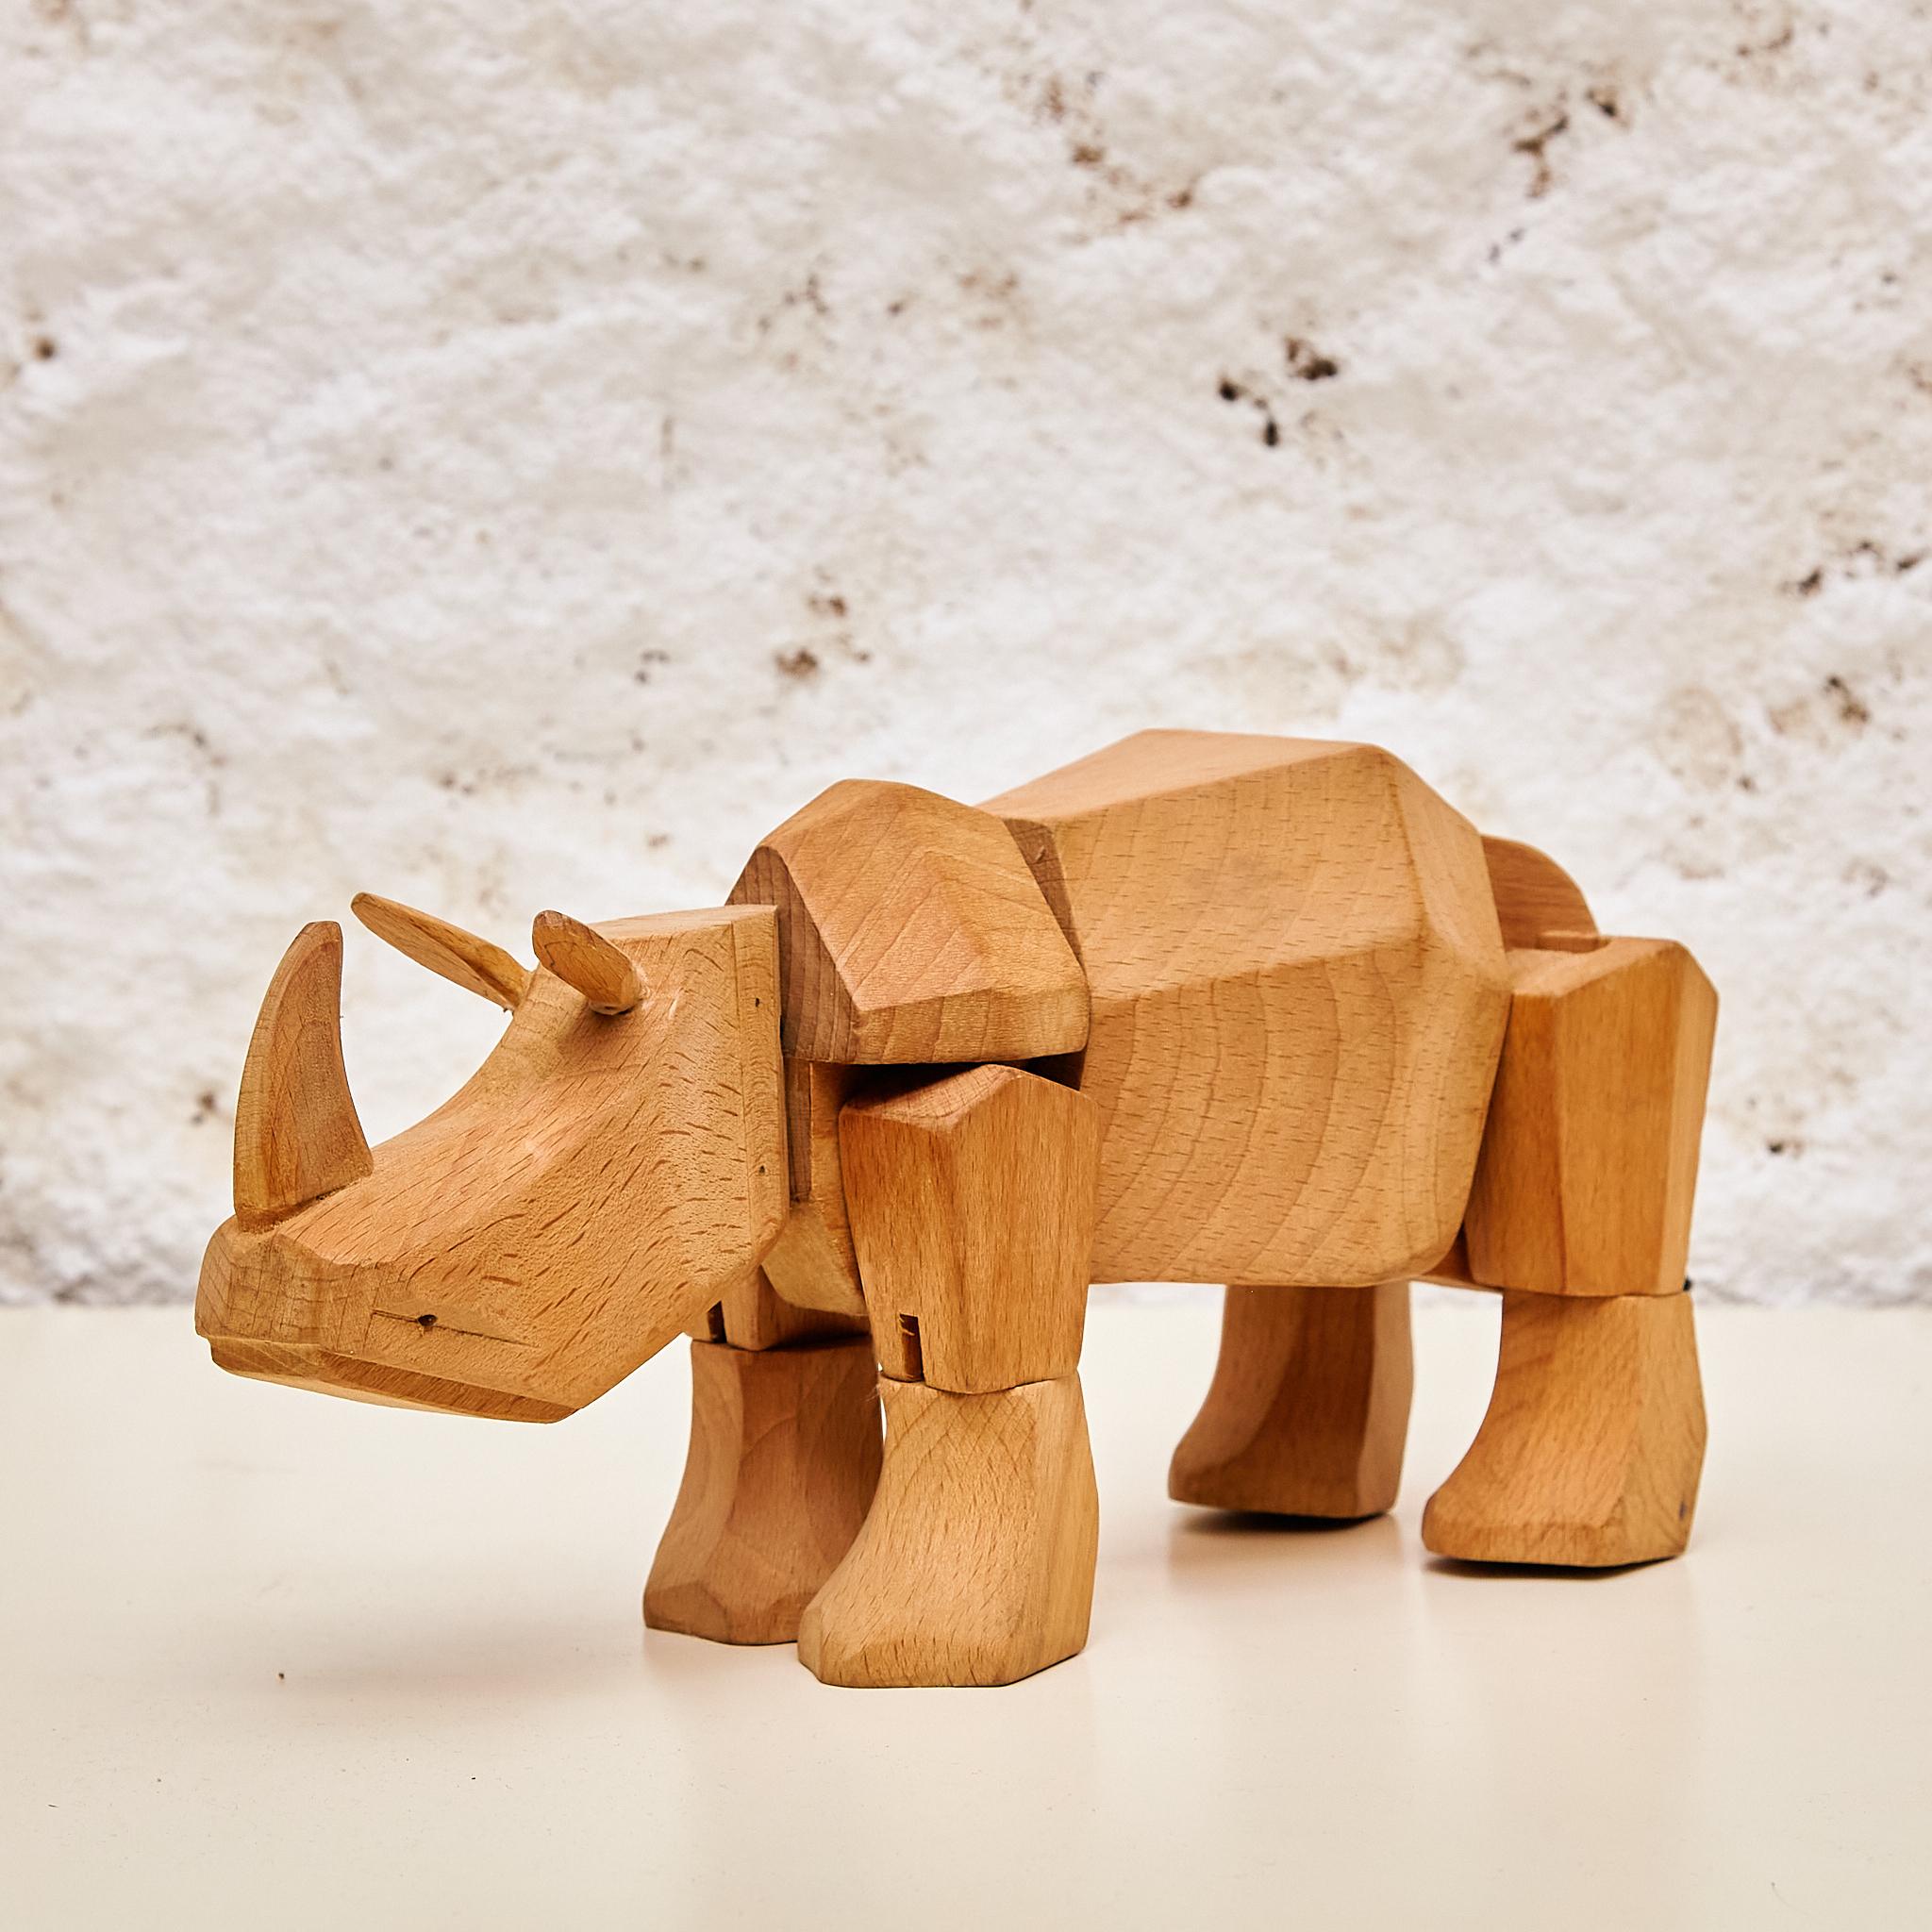 Immerse yourself in artful mastery with the solid wood rhino sculpture 